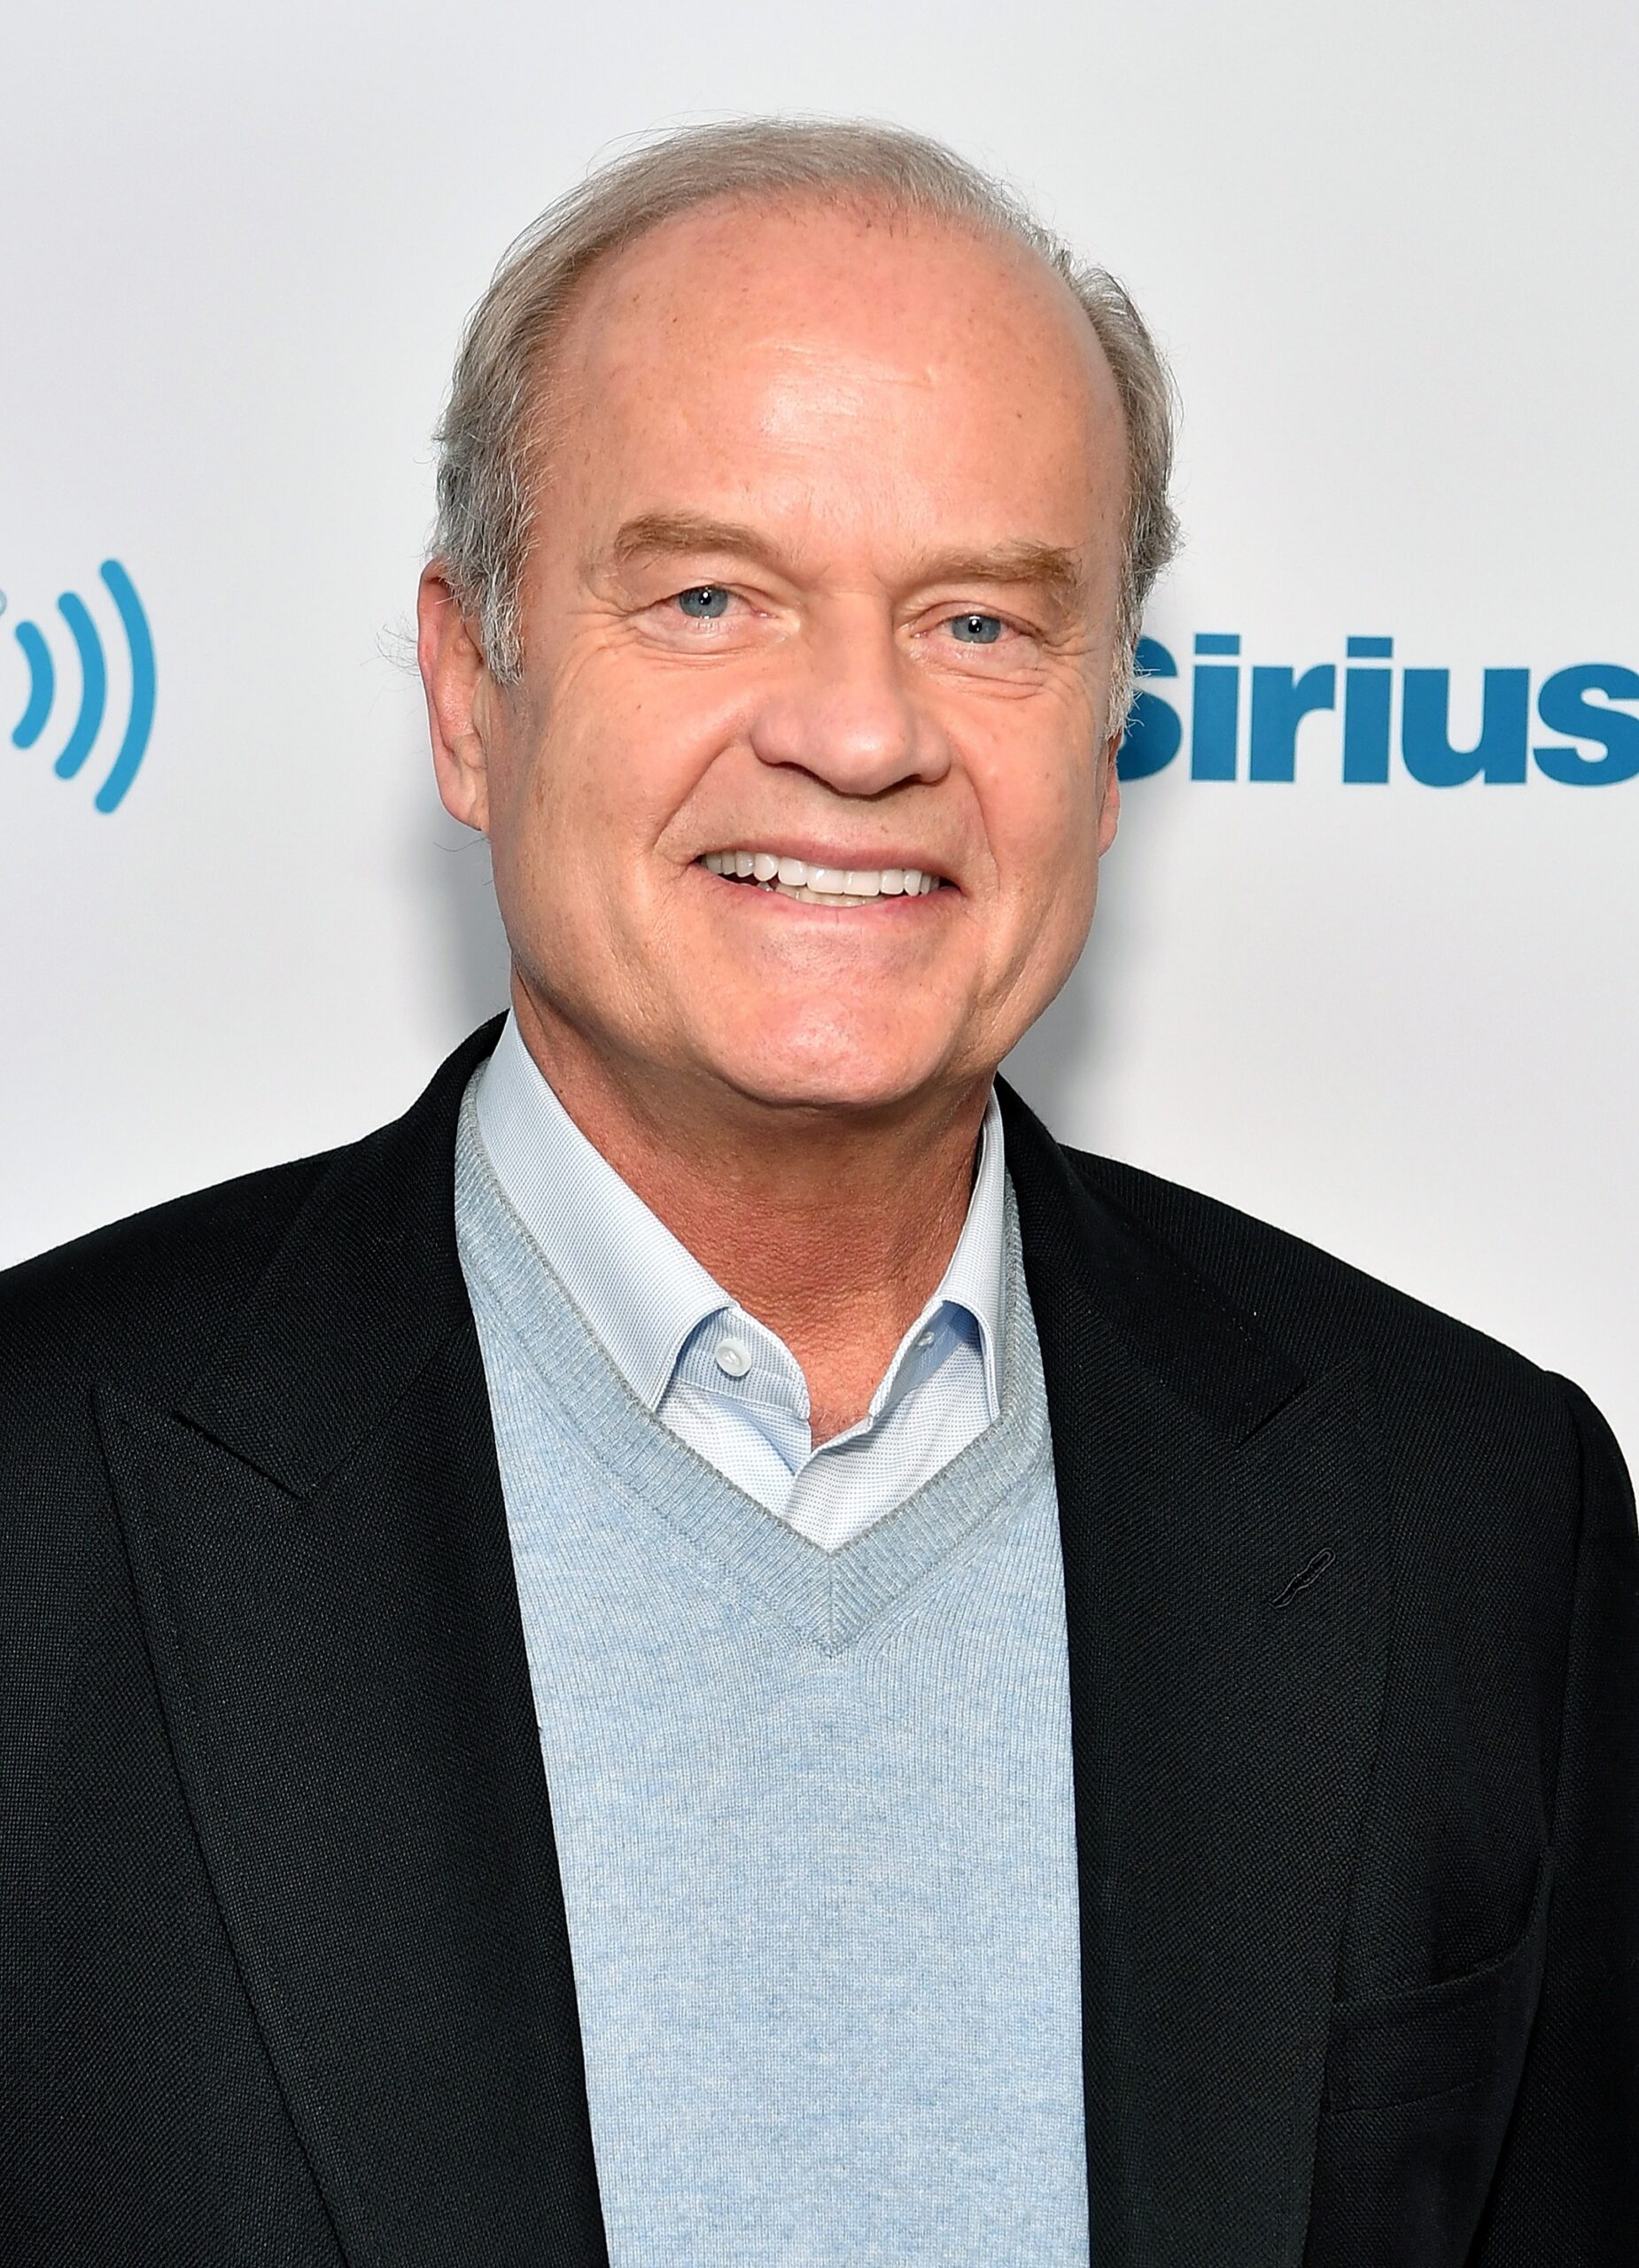 Kelsey Grammer talked to Deadline about the Frasier reboot and they asked if he would reboot another show of his